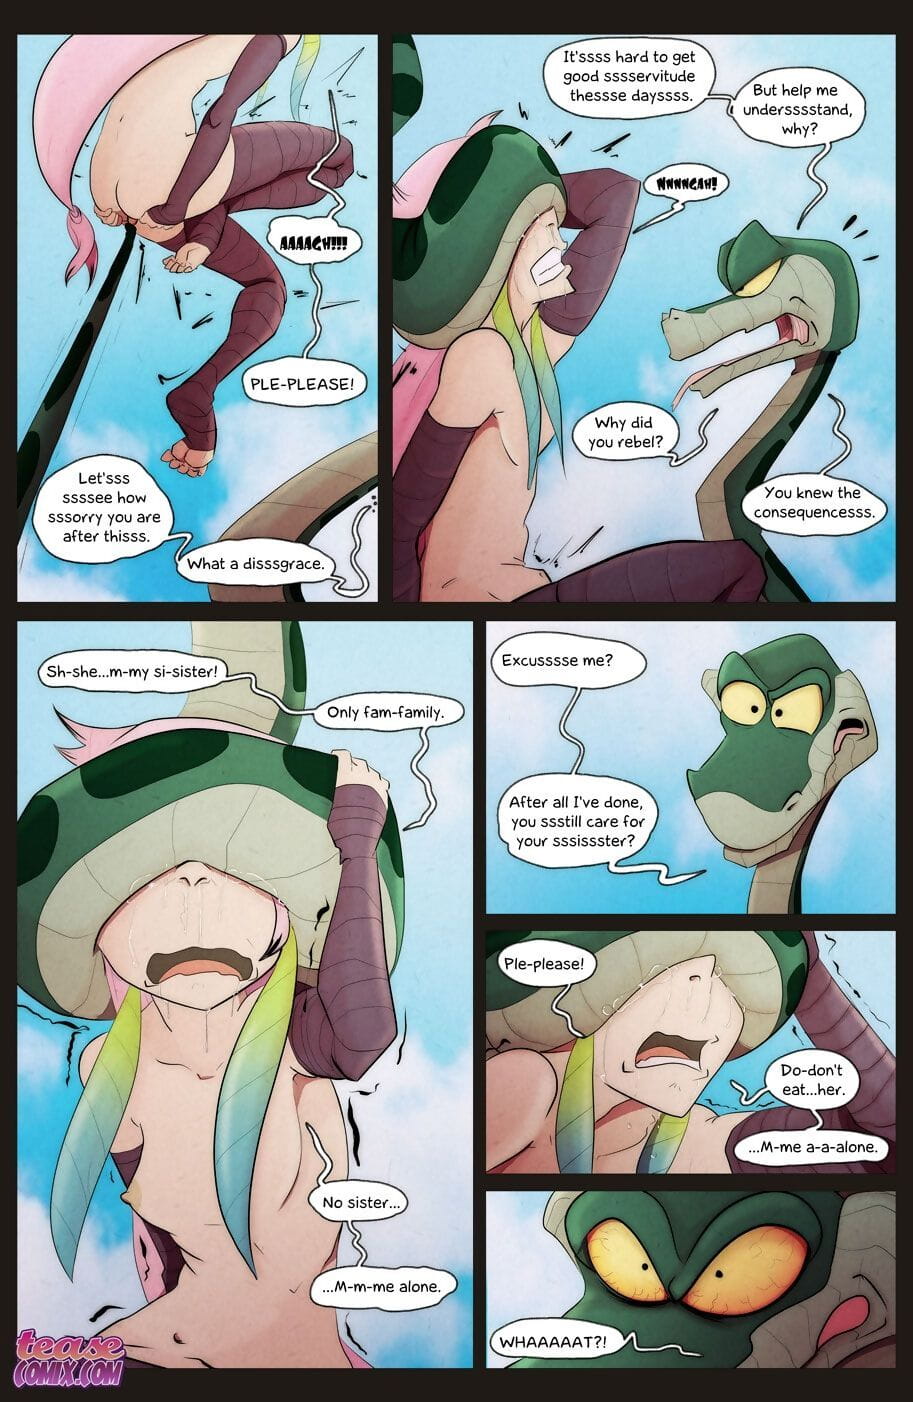 Of the Snake and the Girl - part 5